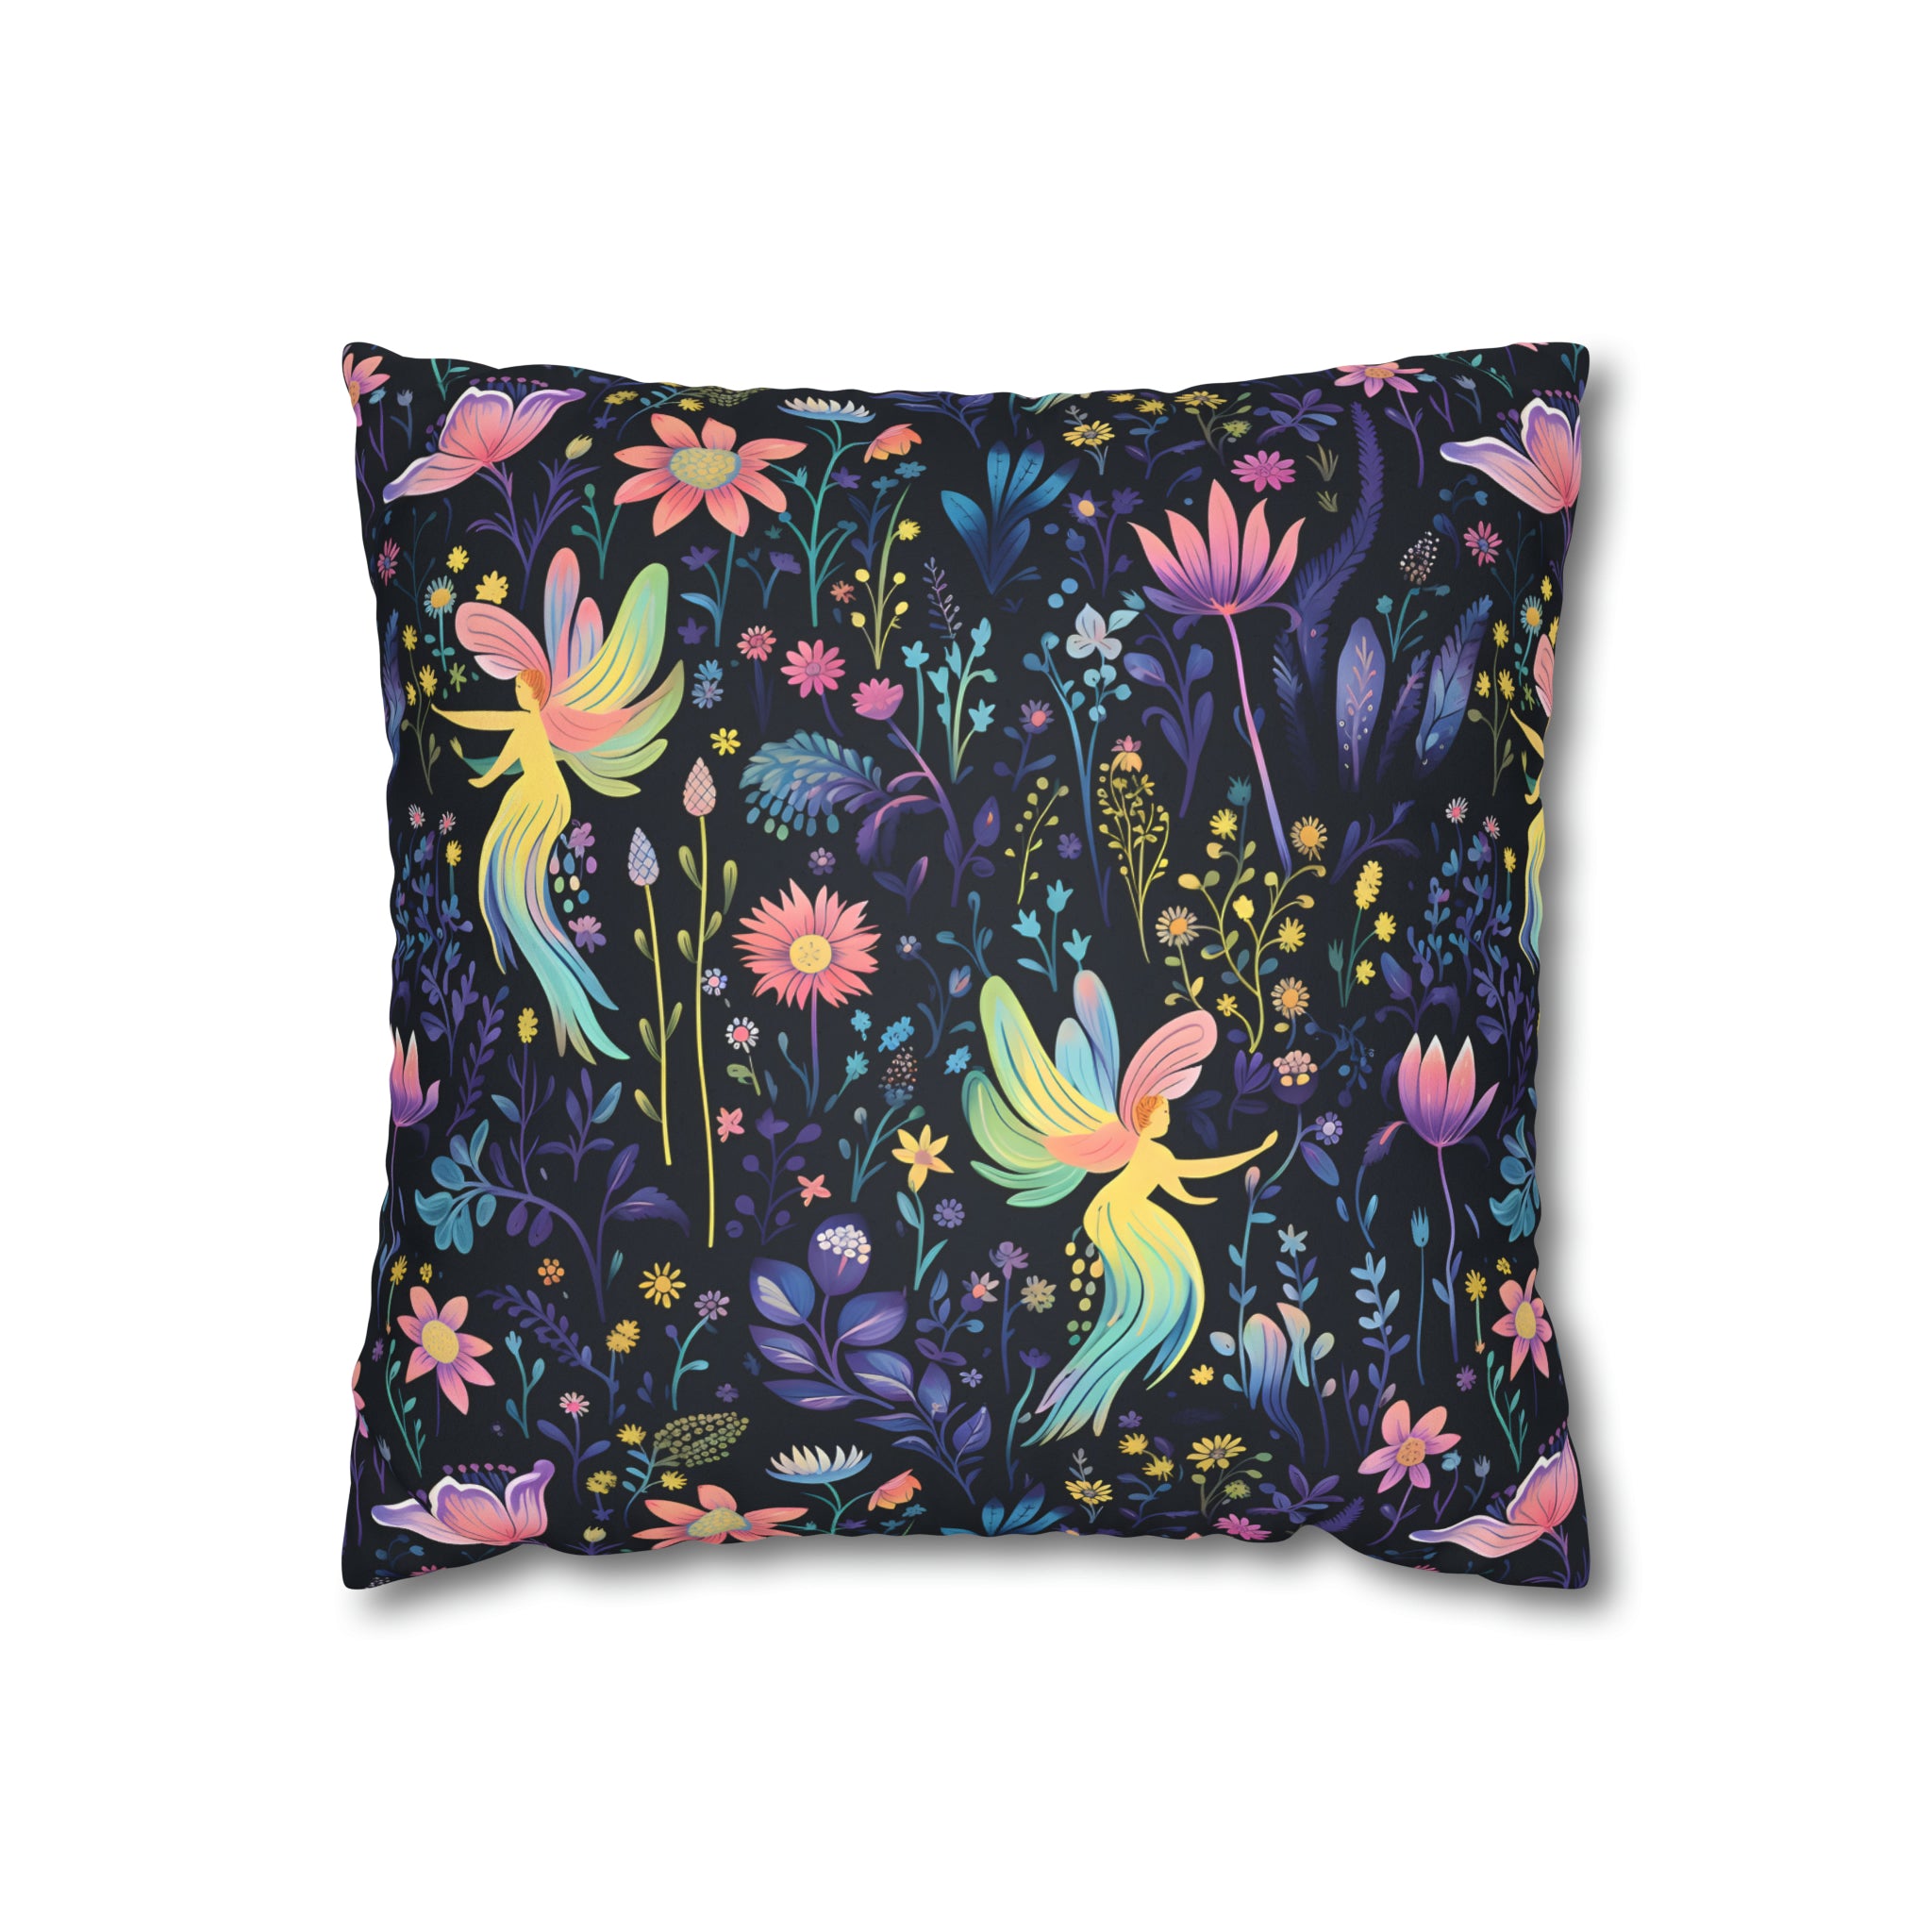 Glowing Garden Fairies Faux Suede Pillow Cover